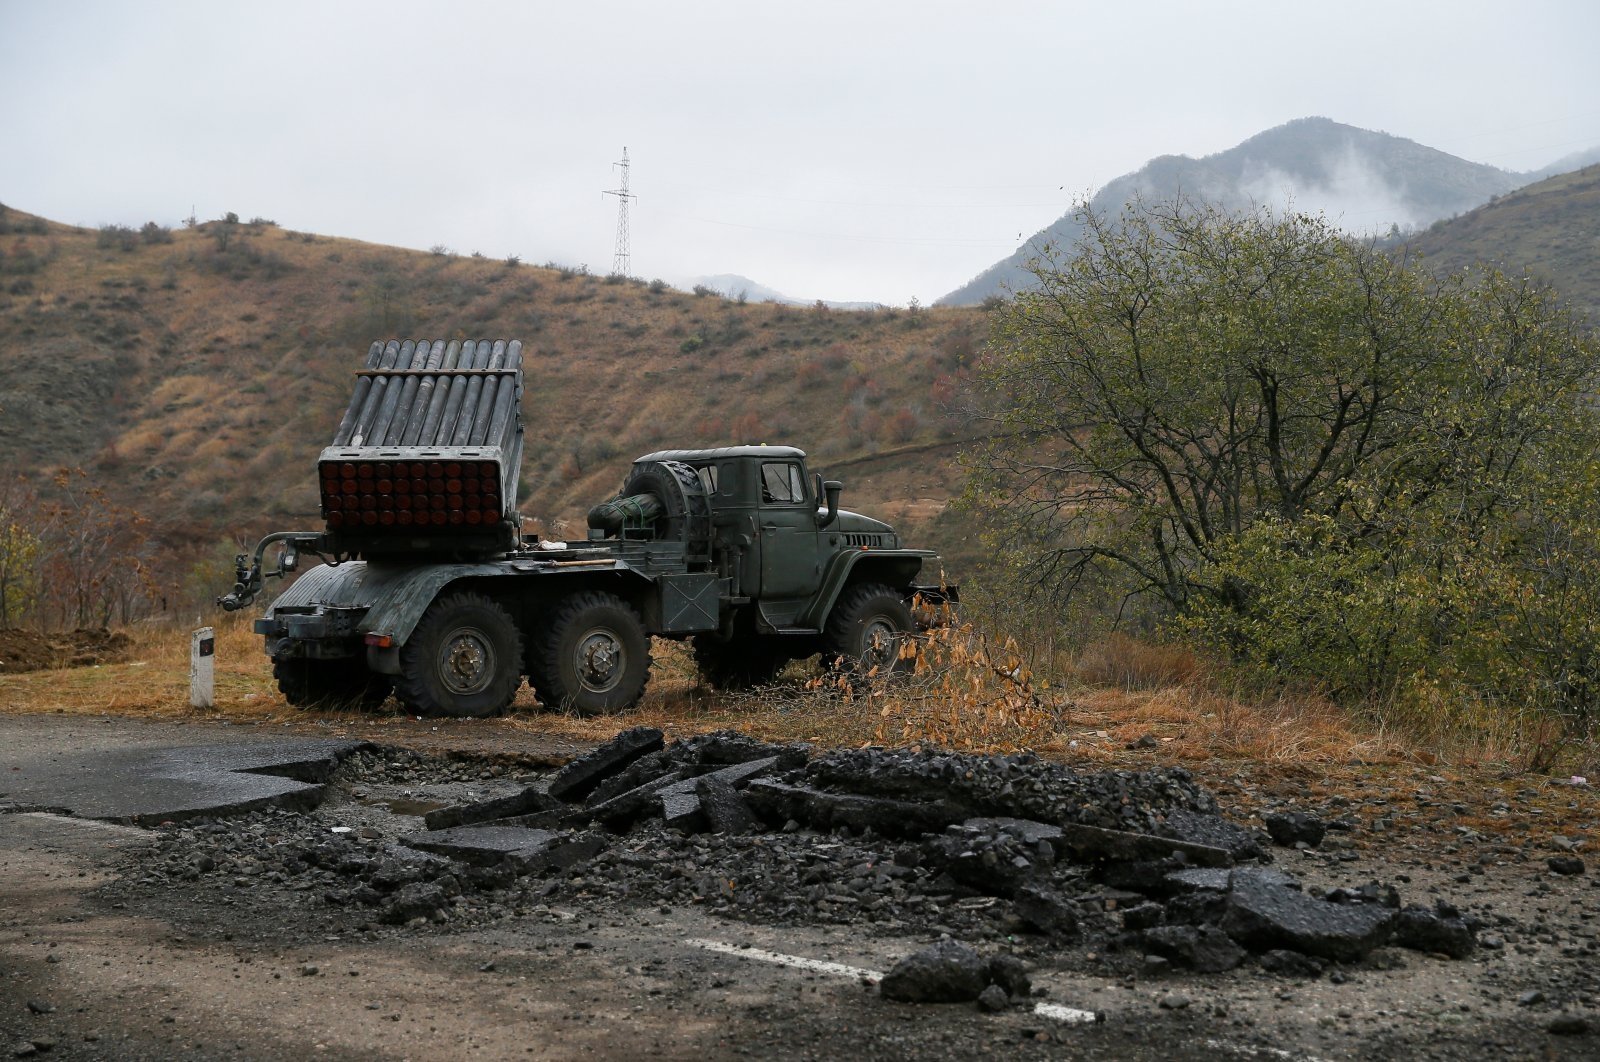 A view shows a multiple rocket launcher of the occupying Armenian military forces near Lachin in the region of Karabakh, Nov. 13, 2020. (Reuters Photo)